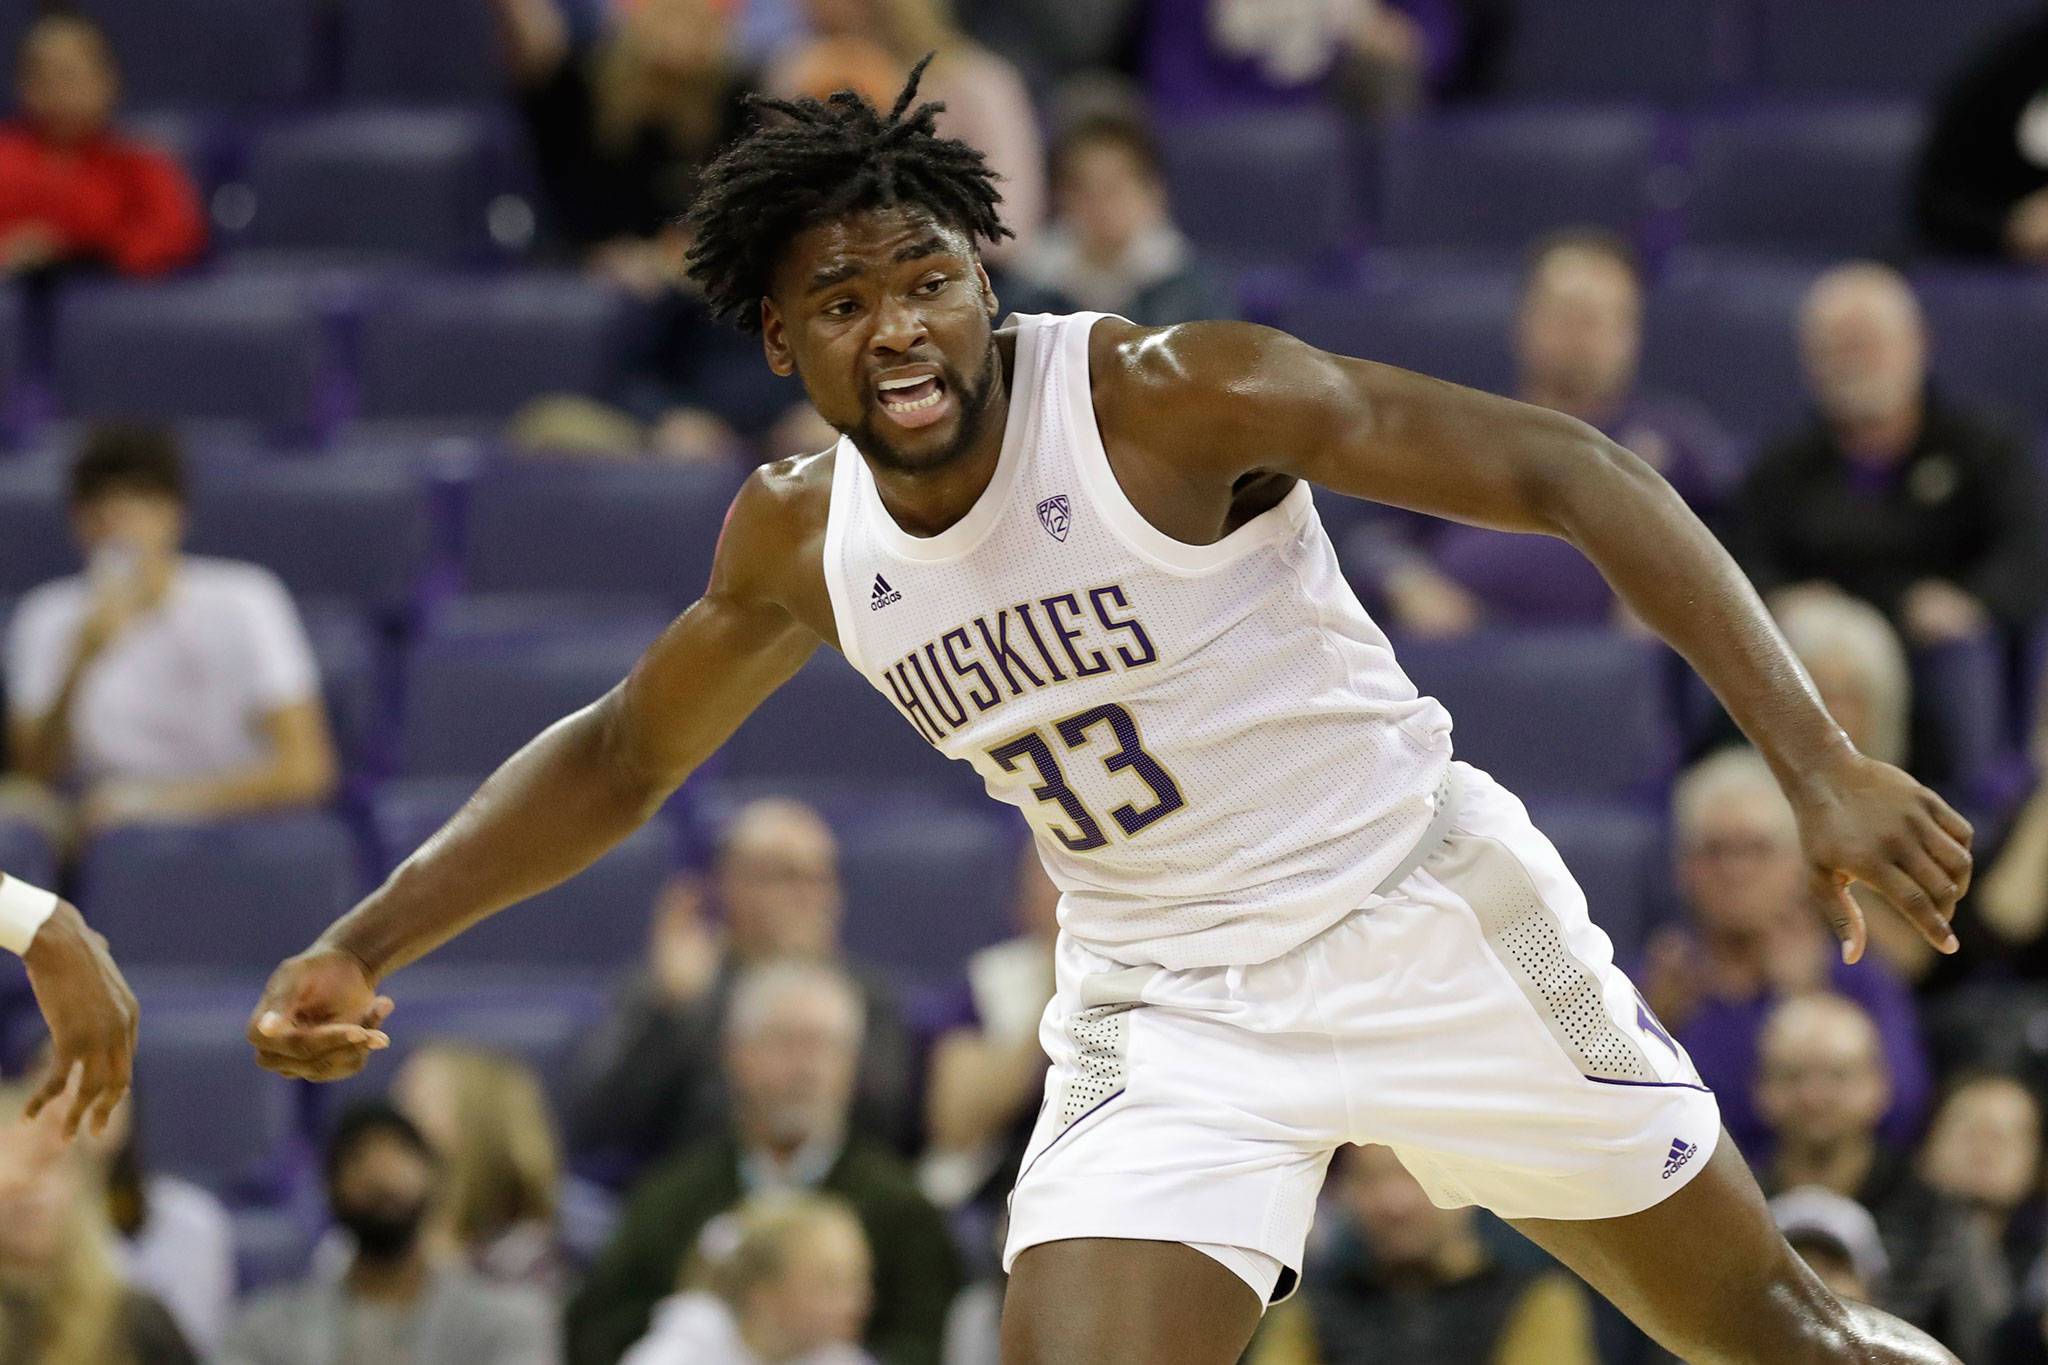 Washington’s Isaiah Stewart reacts after scoring late in the second half of a game against Montana on Nov. 22, 2019, in Seattle. Washington won 73-56. (AP Photo/Elaine Thompson)